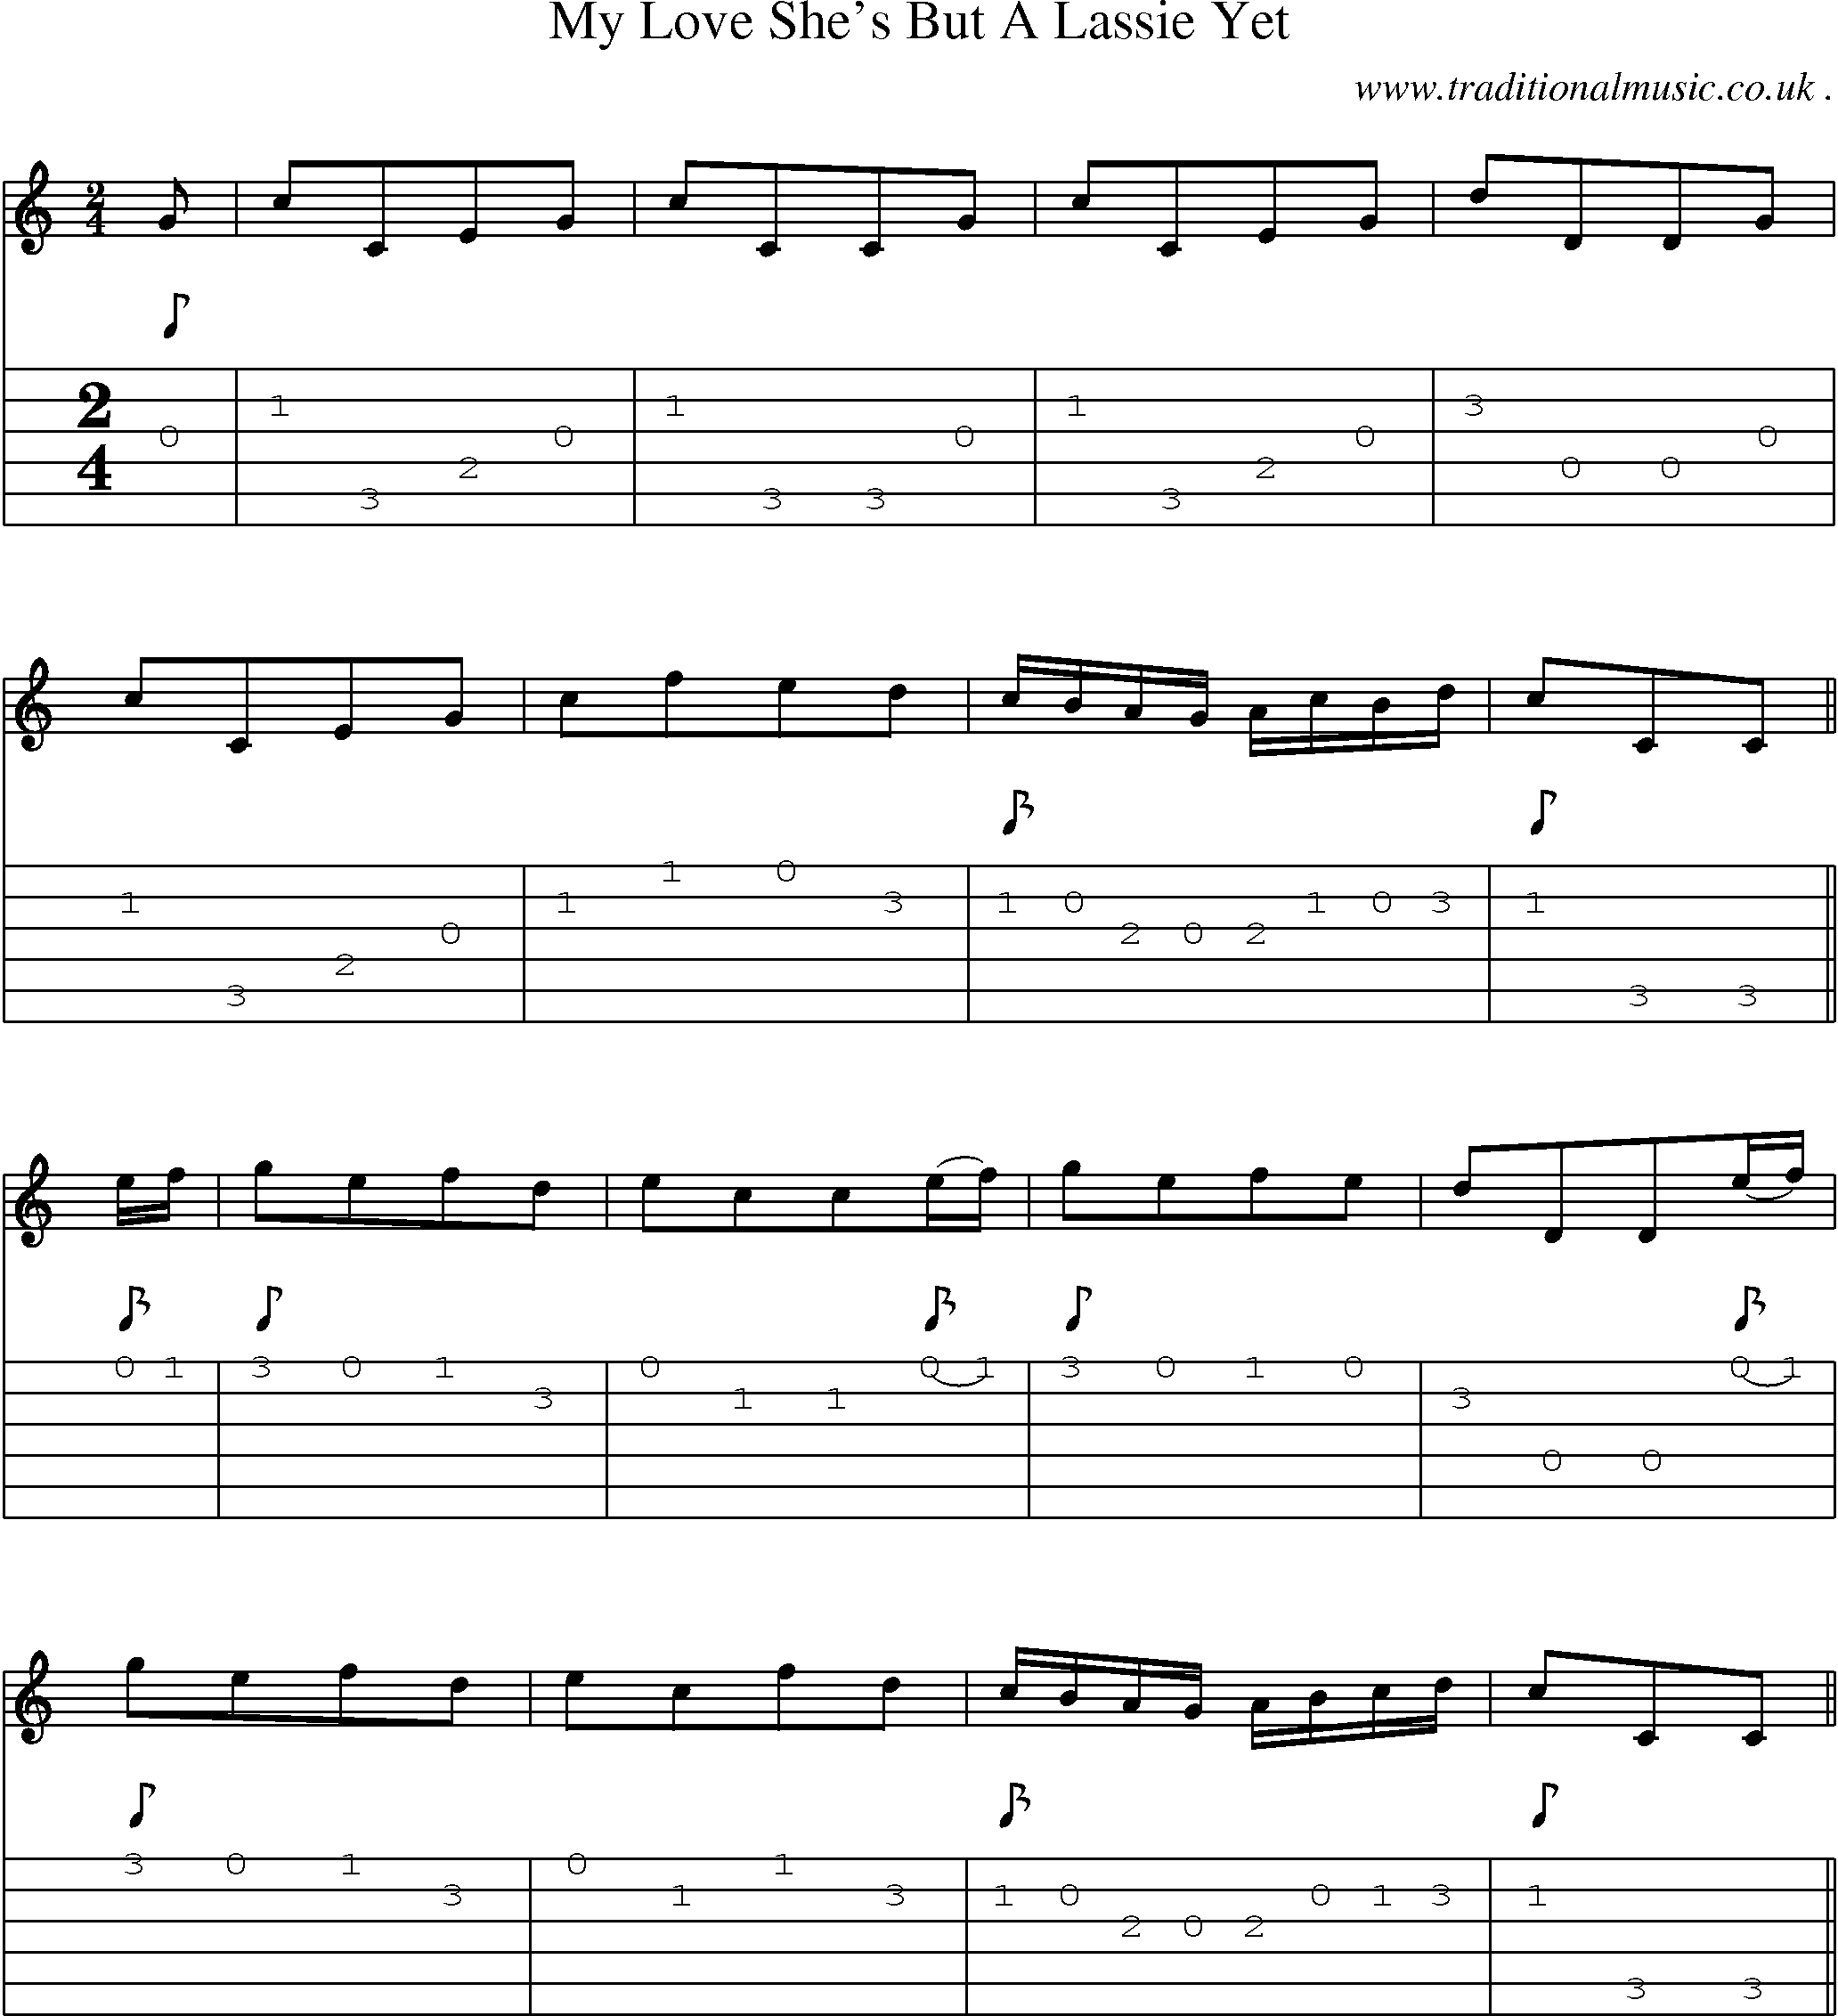 Sheet-Music and Guitar Tabs for My Love Shes But A Lassie Yet